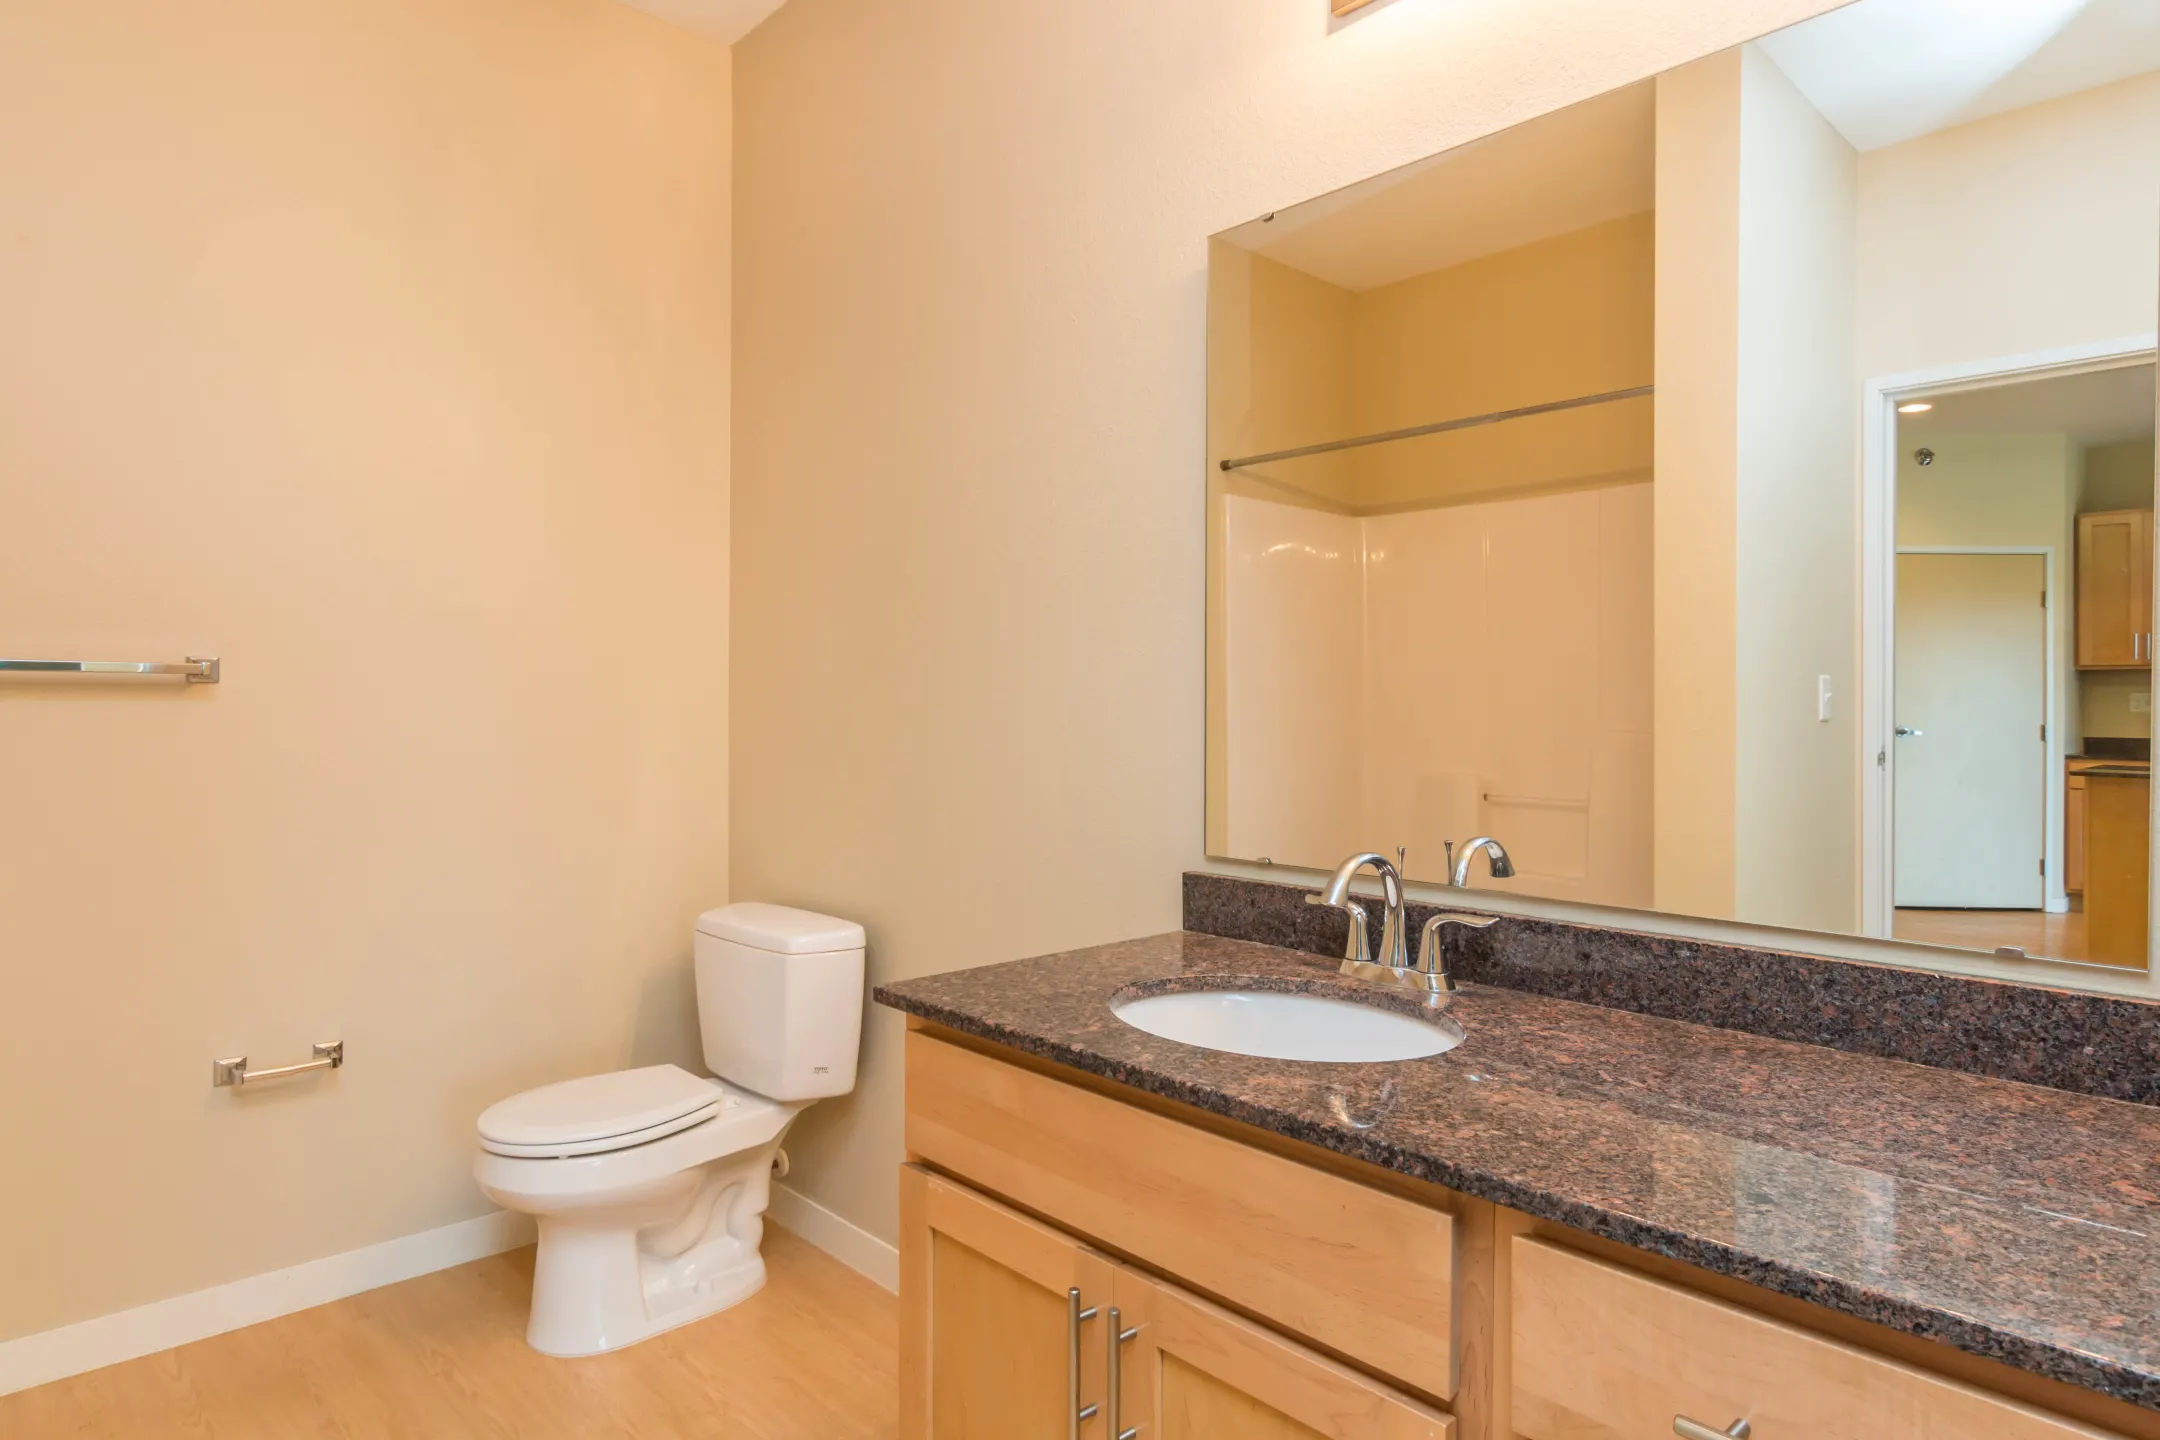 Bathroom - Mallview Apartments - Grand Forks, ND